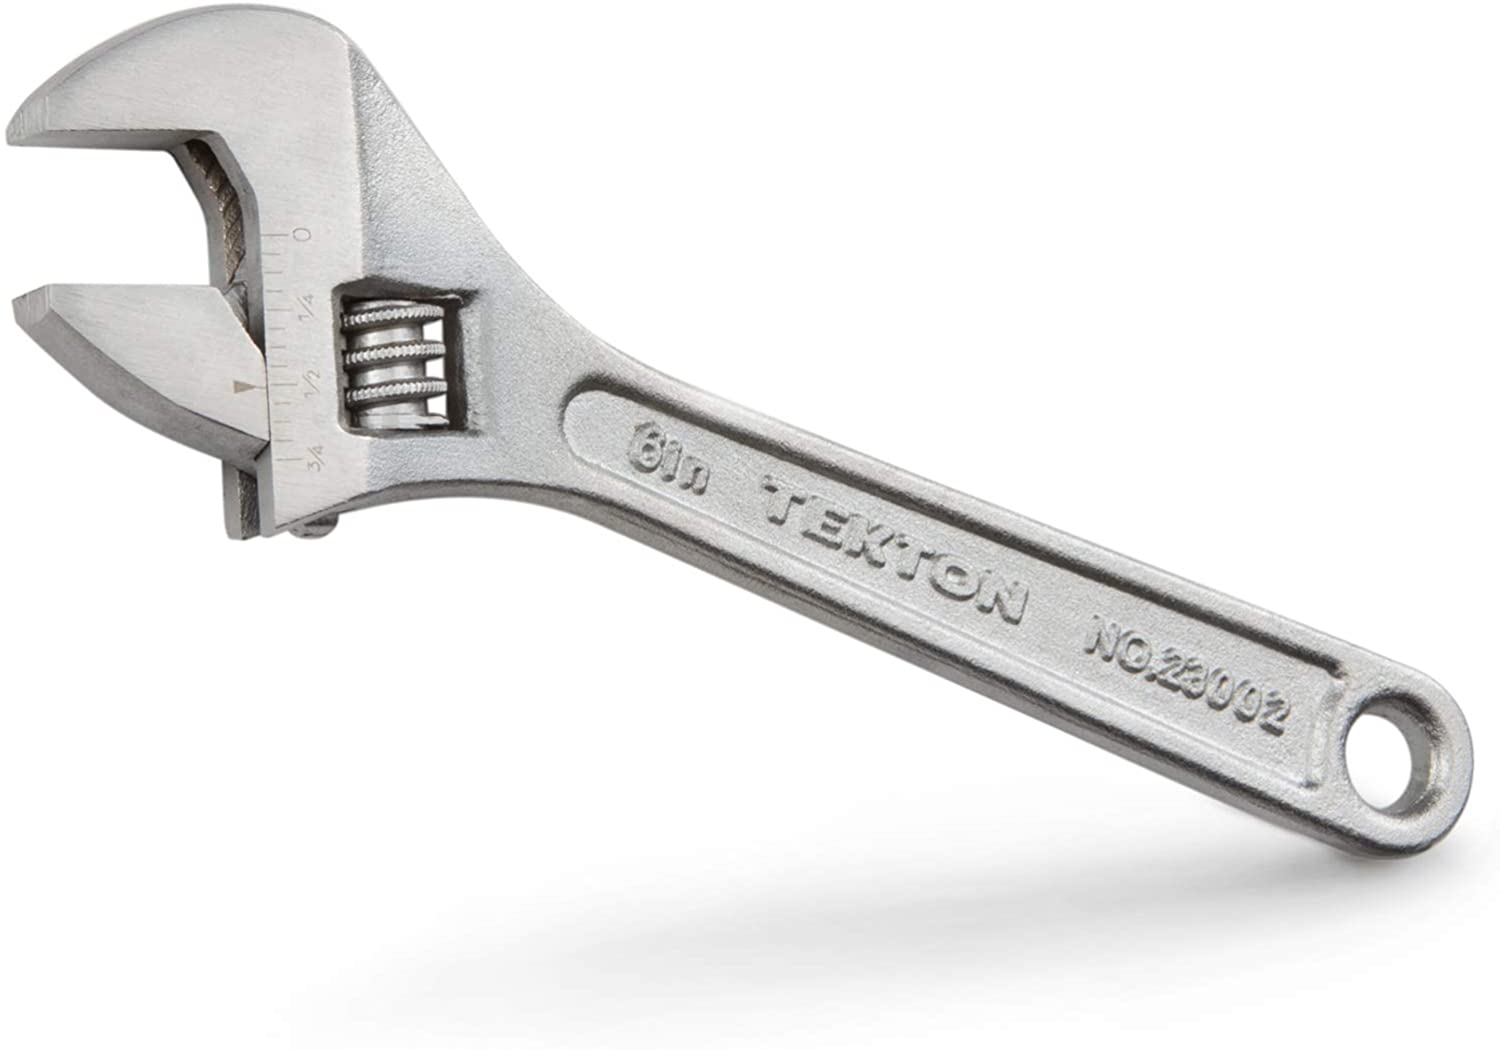 Adjustable Crescent Wrench